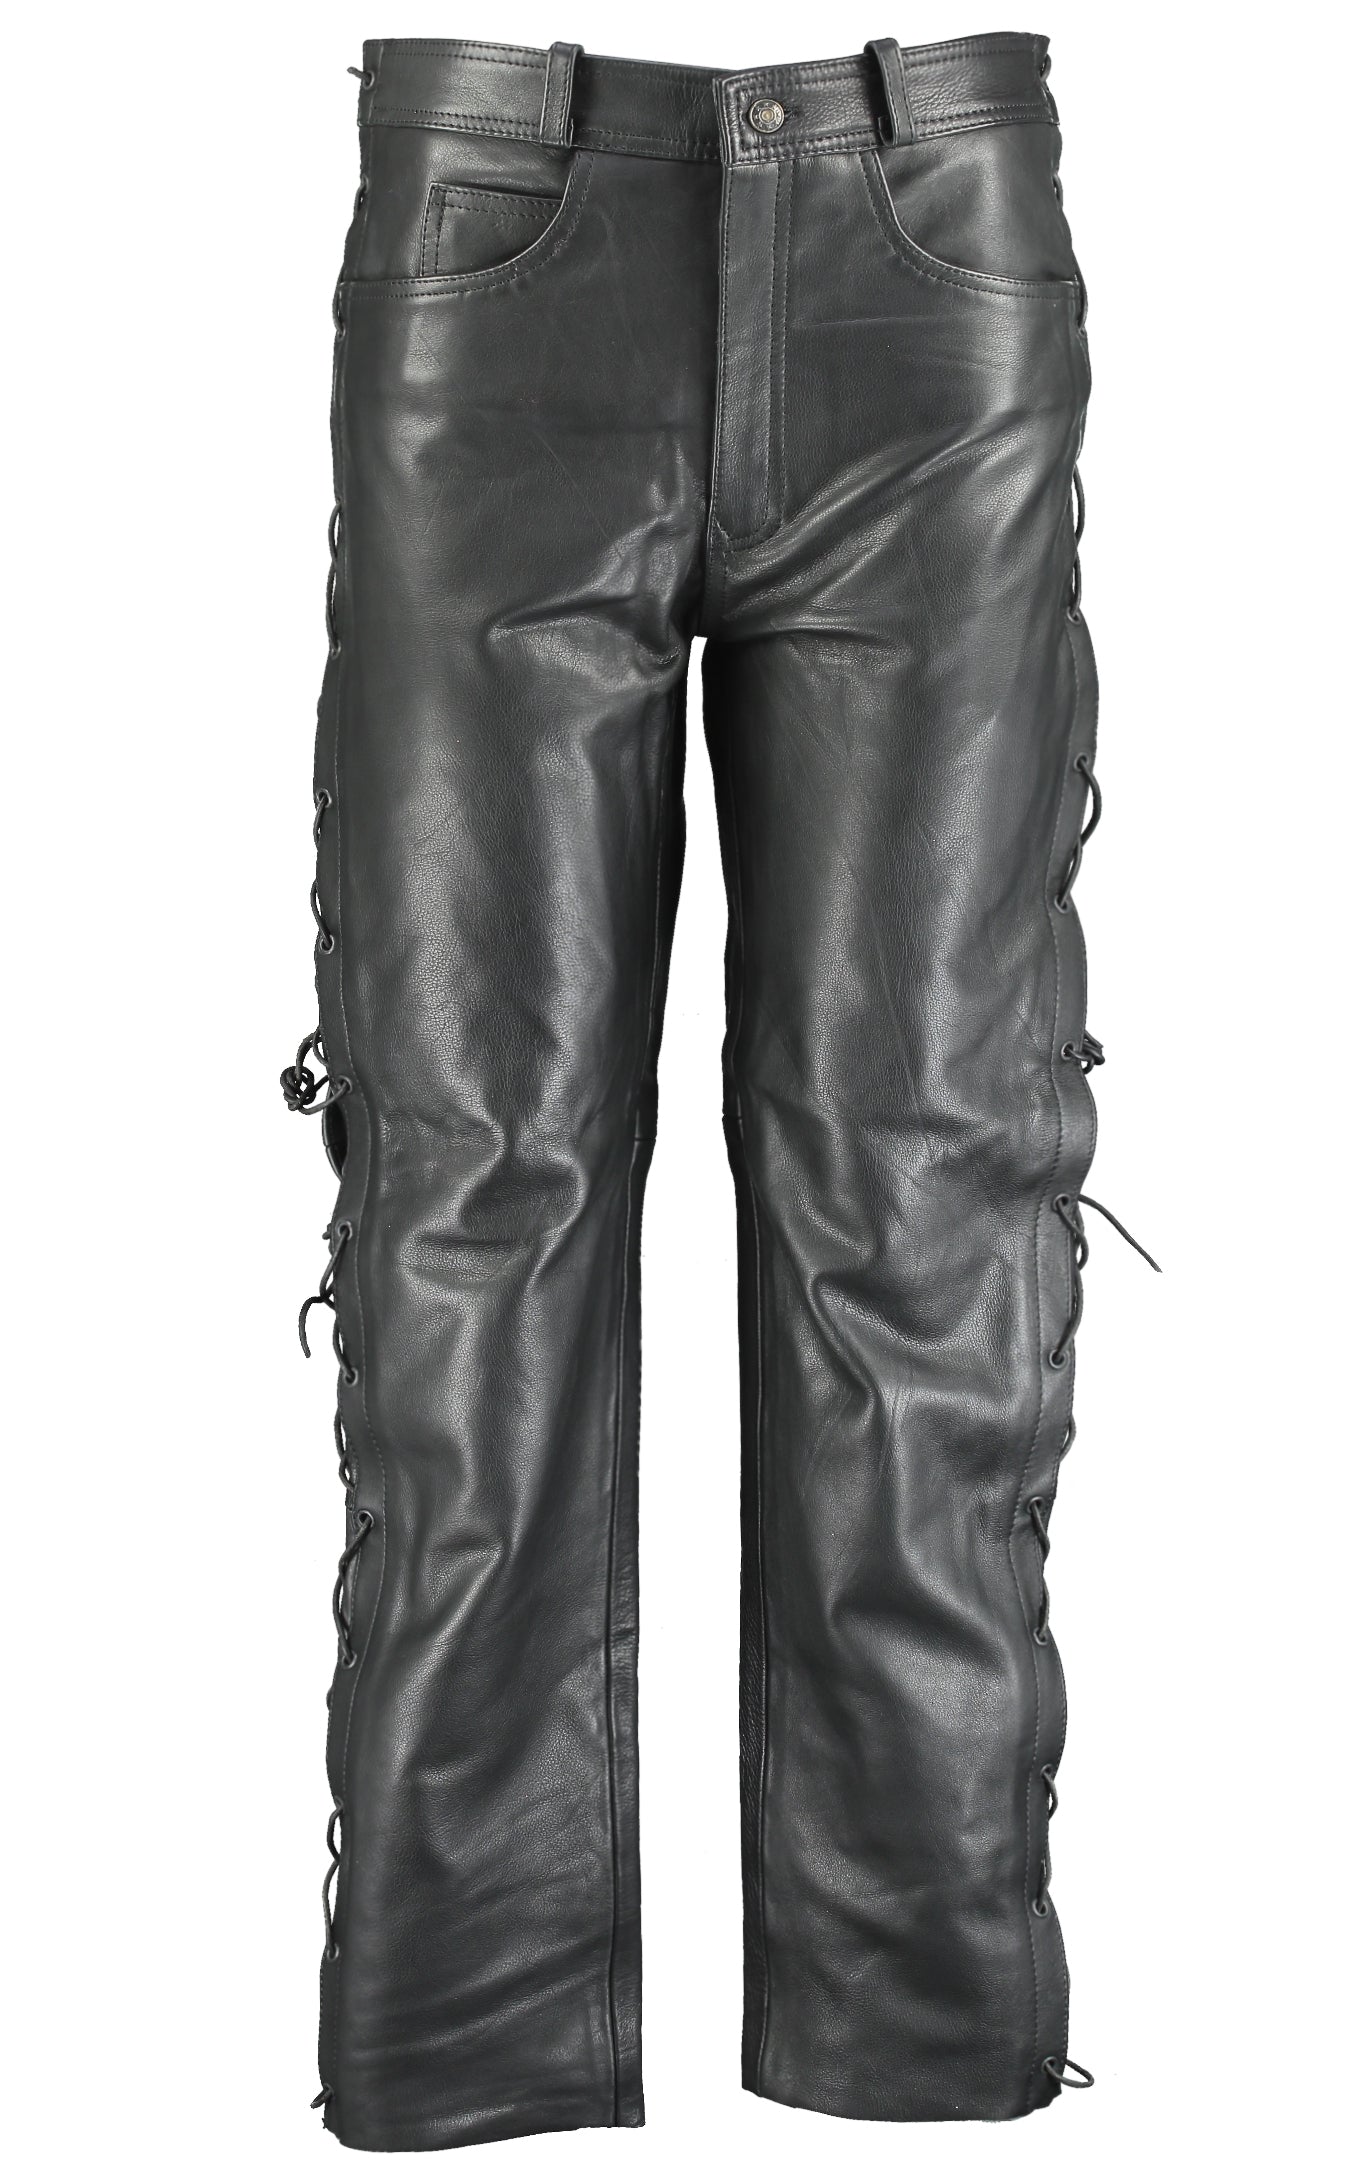 Jean Style Leather Motorcycle Pants with Laces in Black or Brown   Gallantocouk Online Shopping  Leather Jackets Bags Textile Jackets  Trousers Bikers Accessories